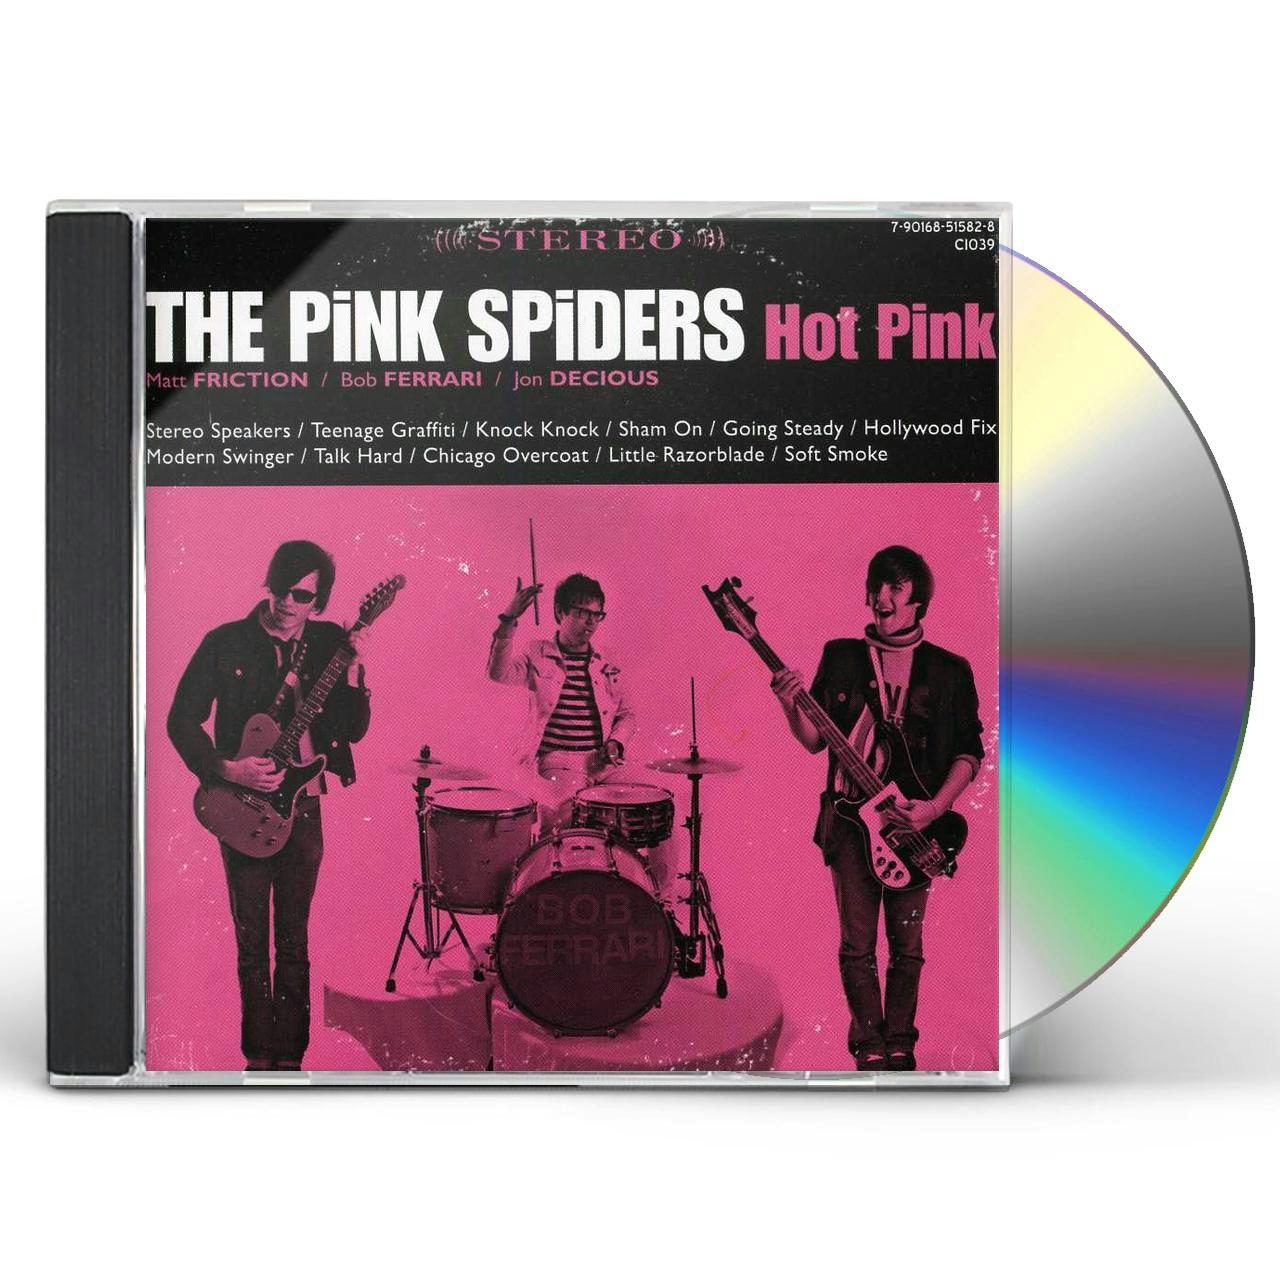 modern swinger by the pink spiders